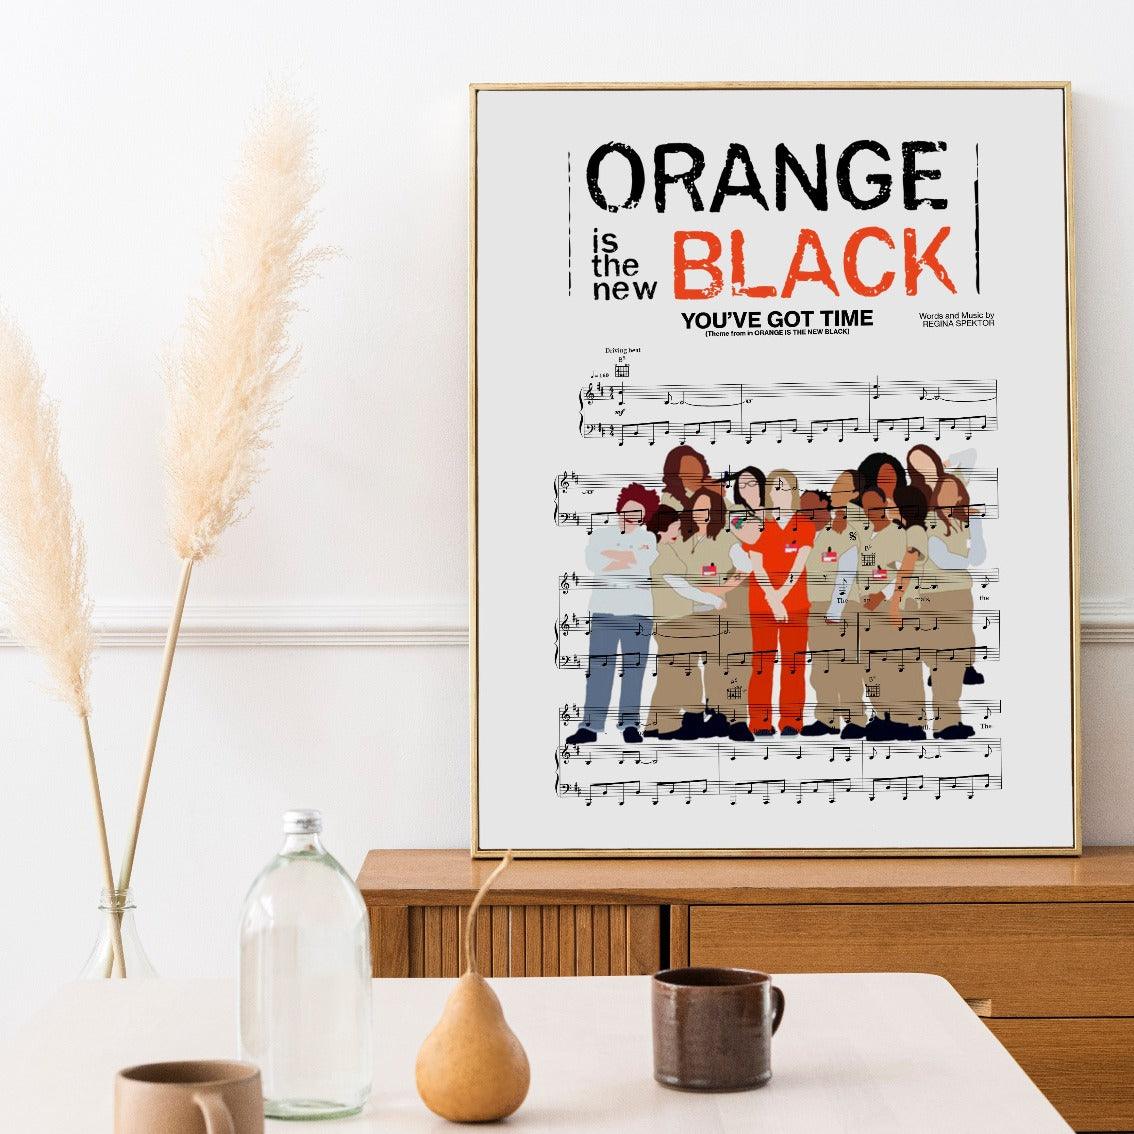 If you're a fan of the show, this poster is a must-have. The eye-catching, retro design is a perfect addition to any fan's wall. Relive your favorite moments from the show with this beautiful poster.